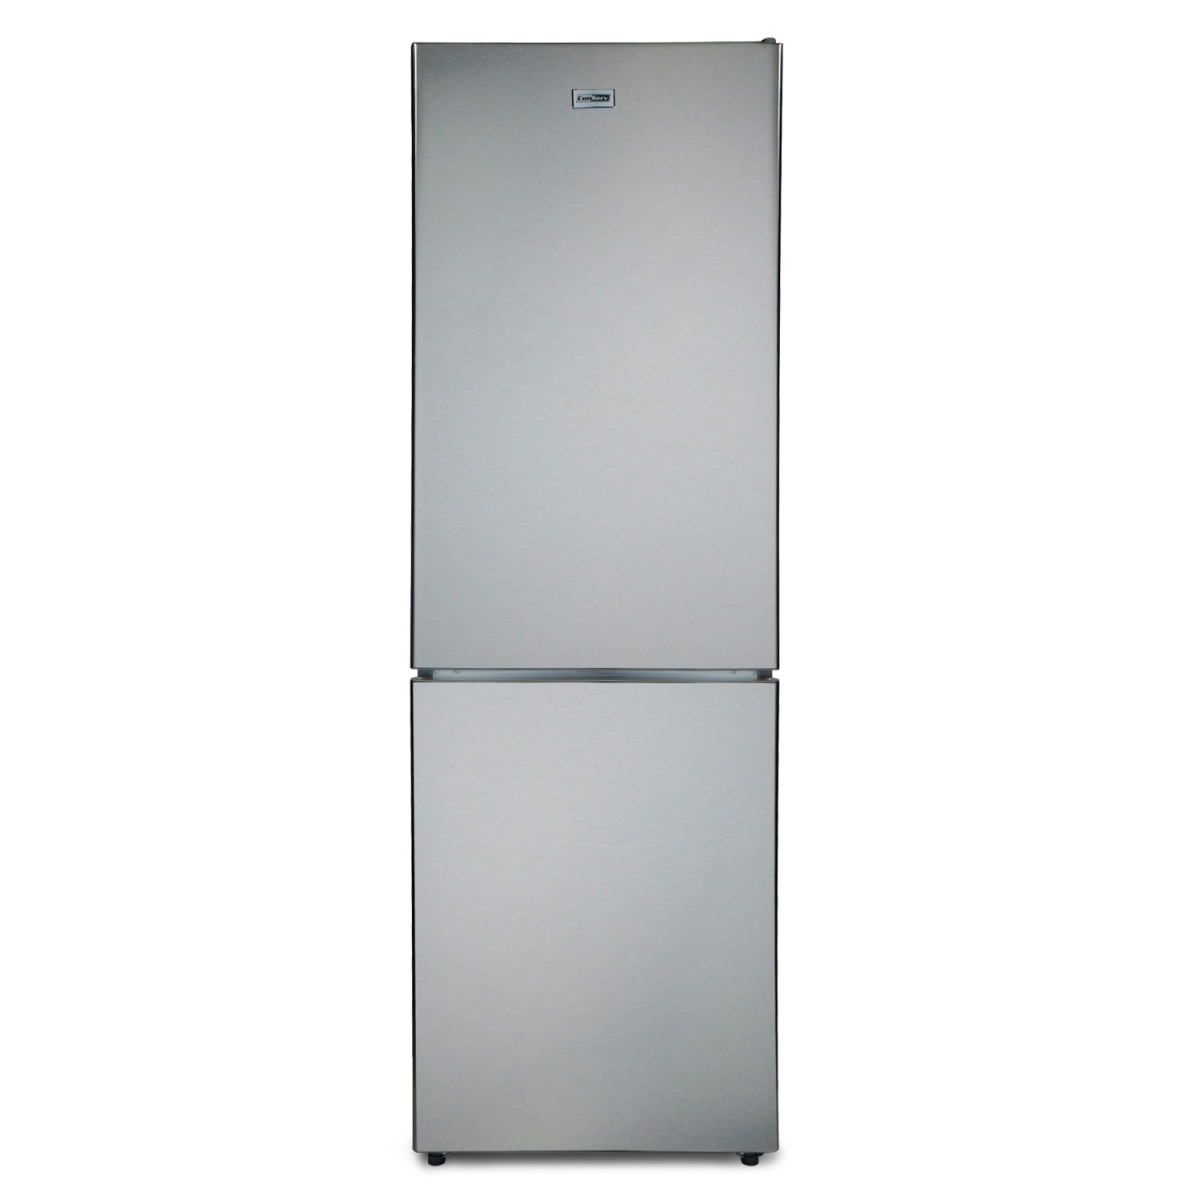 Conserv 24' Wide 10.8 cu.ft.Bottom Freezer Refrigerator Stainless -  CoolCookware, CO2950314